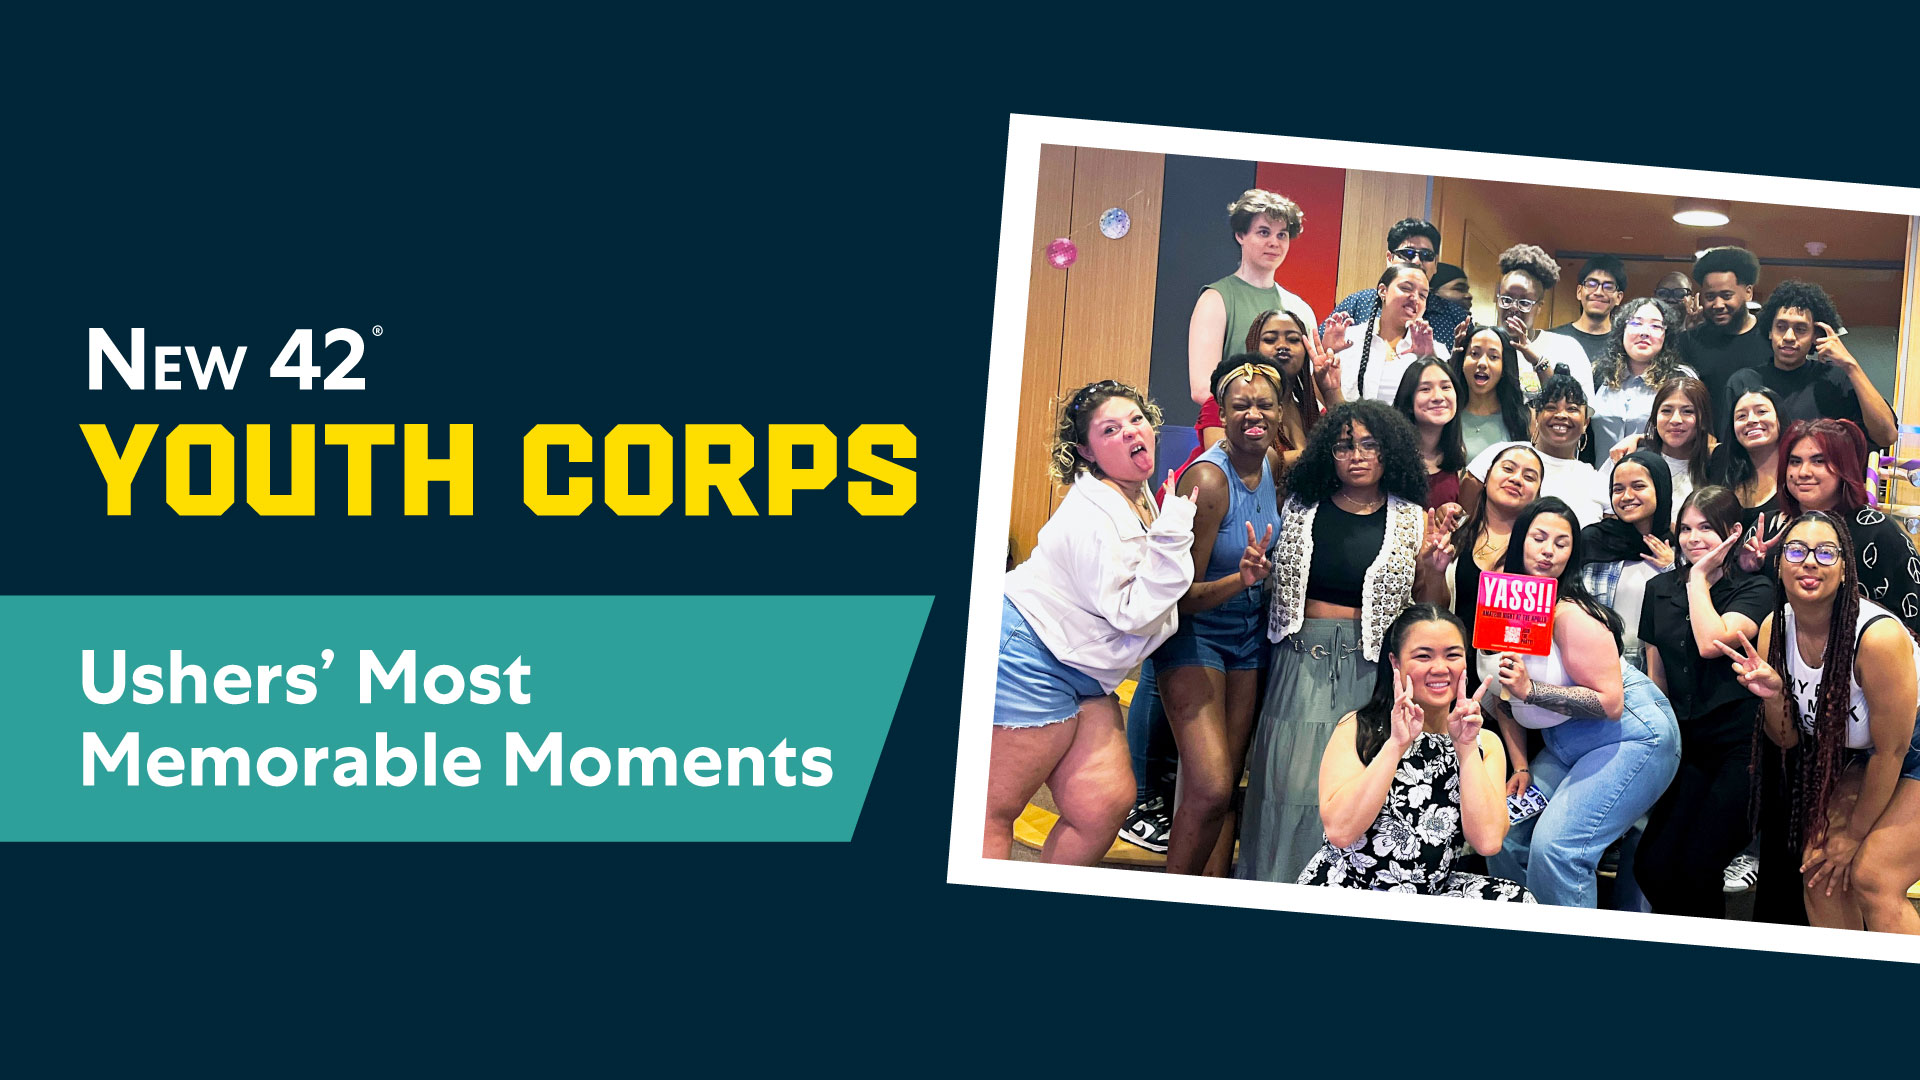 Blog header with the blog title and a group photo of the New 42 Youth Corps